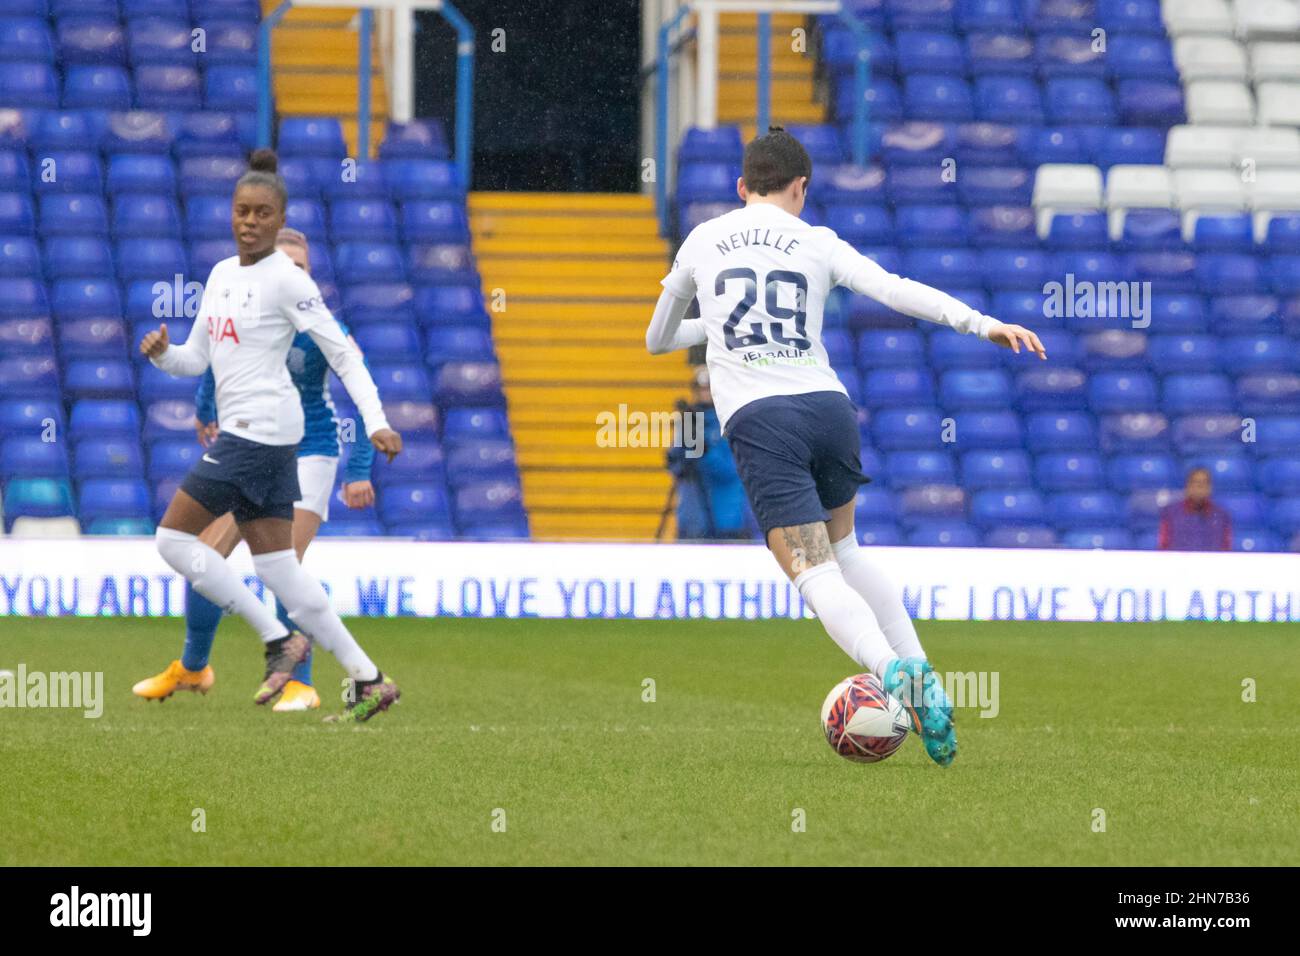 Ashleigh Neville of Tottenham Hotspur advancing down the left wing with the ball Stock Photo